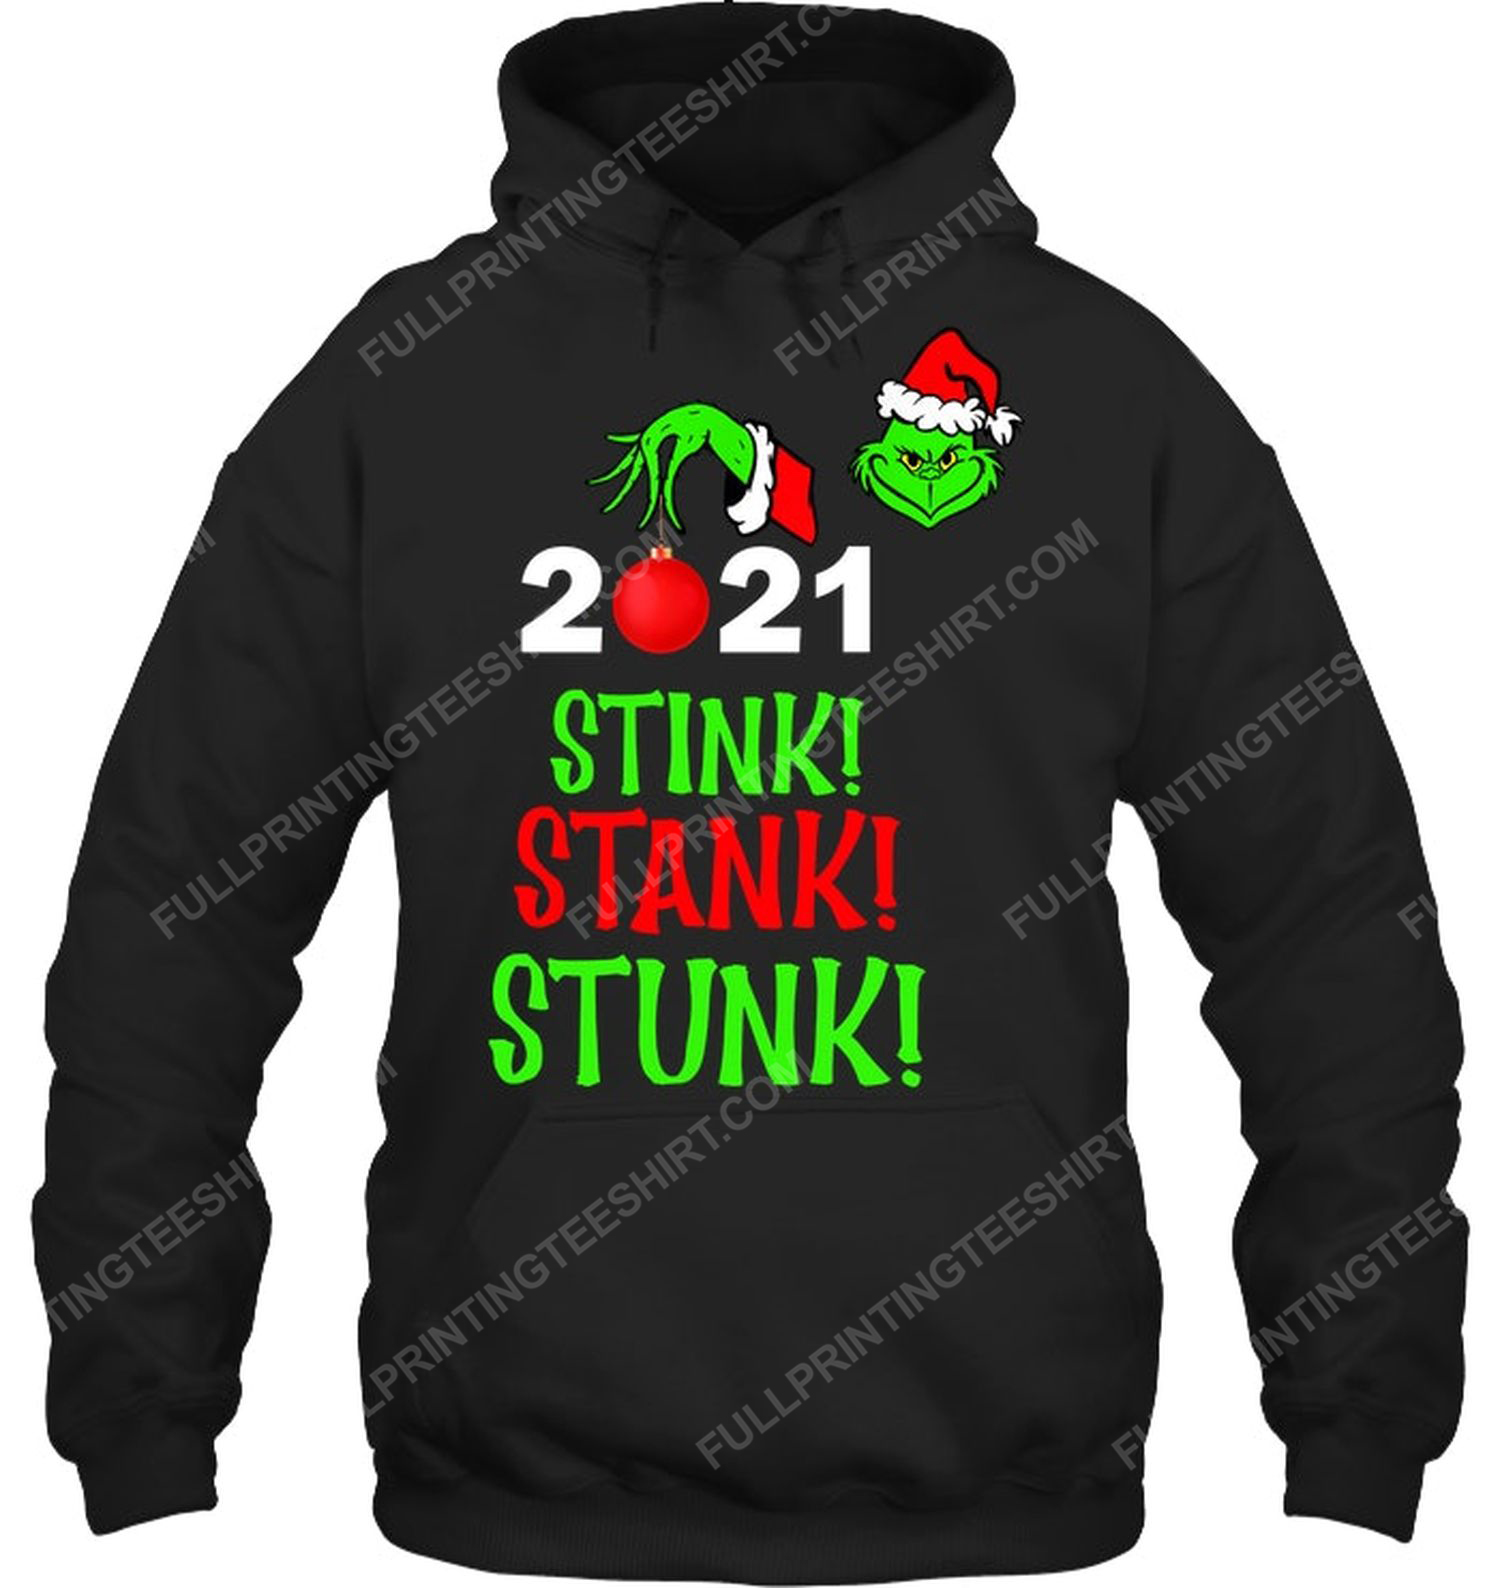 For christmas the grinch stink stank stunk 2021 hoodie